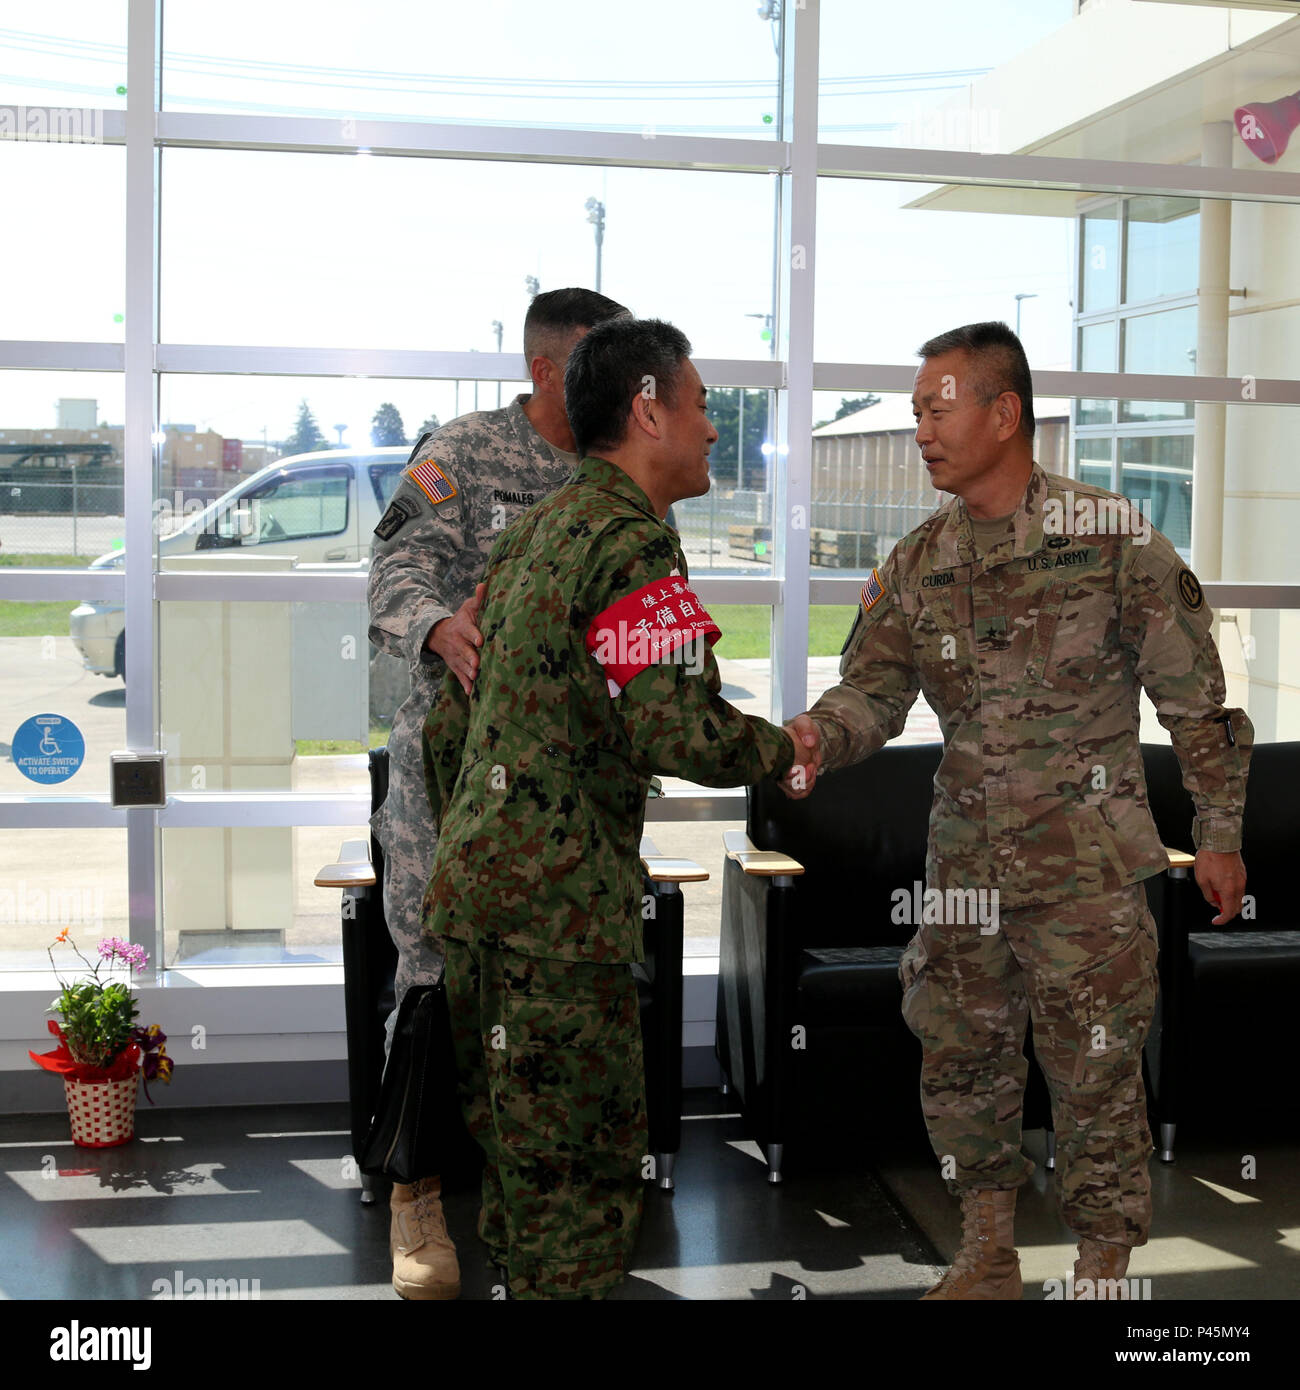 Brig. Gen. Stephen K. Curda, Commander, 9th Mission Support Command, meets with Col. Kei Hasegawa and Col. Luis Pomales, director, Army Reserve Engagement Team-Japan, at Sagamihara Depot Mission Training Complex during exercise Imua Dawn 2016, Sagamihara, Japan, June 18, 2016.  Imua Dawn 2016 provides opportunities for U.S. and Japanese forces to come together and train for potential real world events, better preparing them in supporting regional populations in all Humanitarian Assistance and Disaster Relief (HADR) and Noncombatant Evacuation Operations (NEO). Training together, the U.S. and J Stock Photo